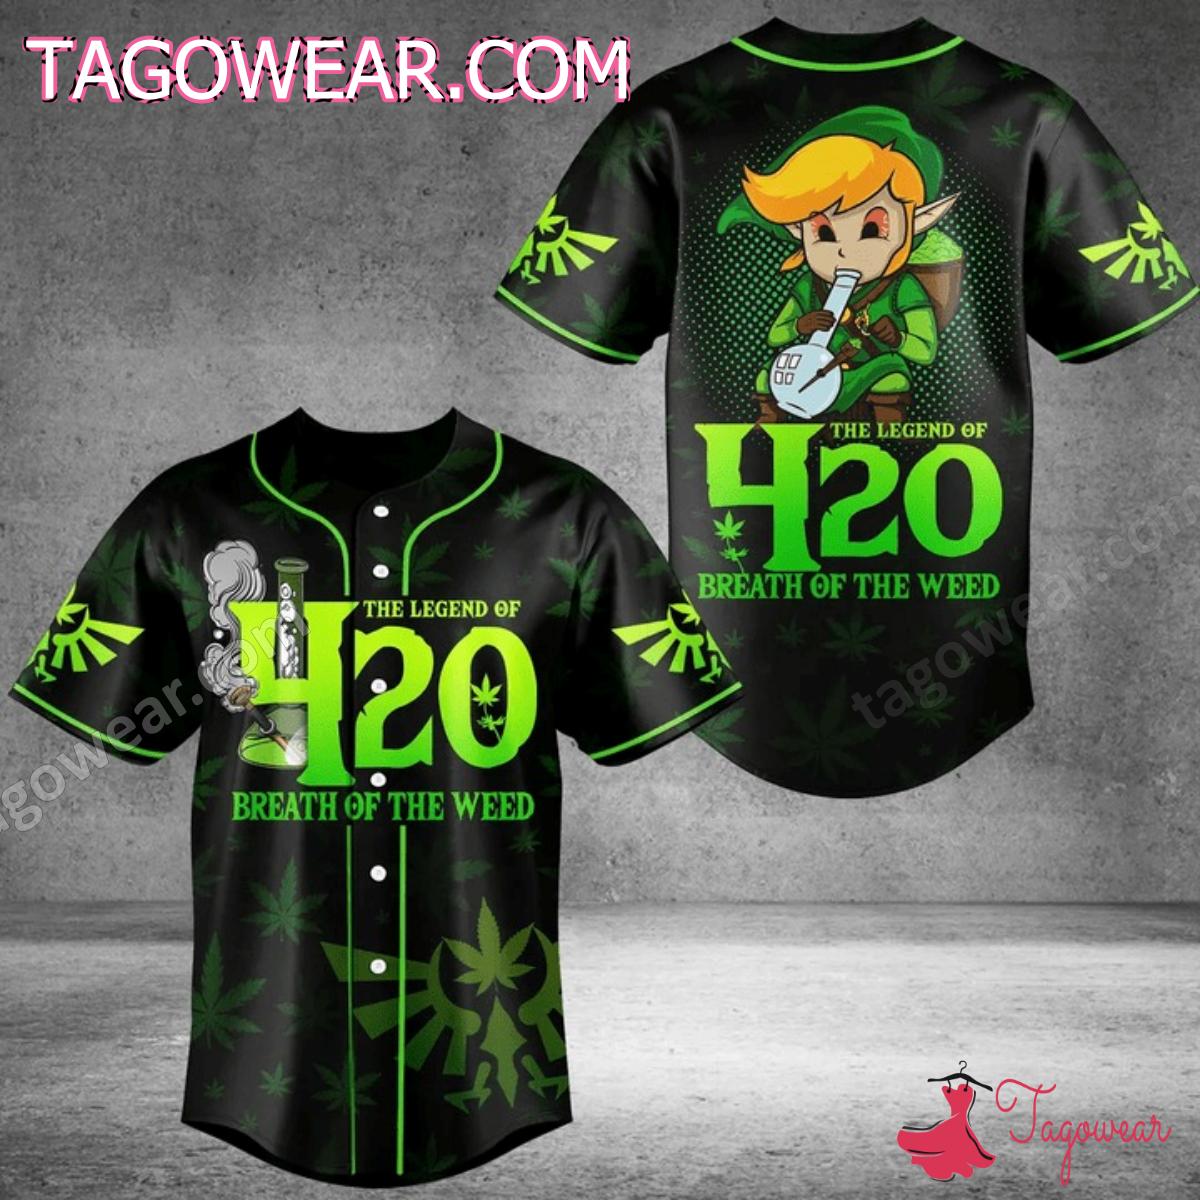 Link The Legend Of 420 Breath Of The Weed Baseball Jersey